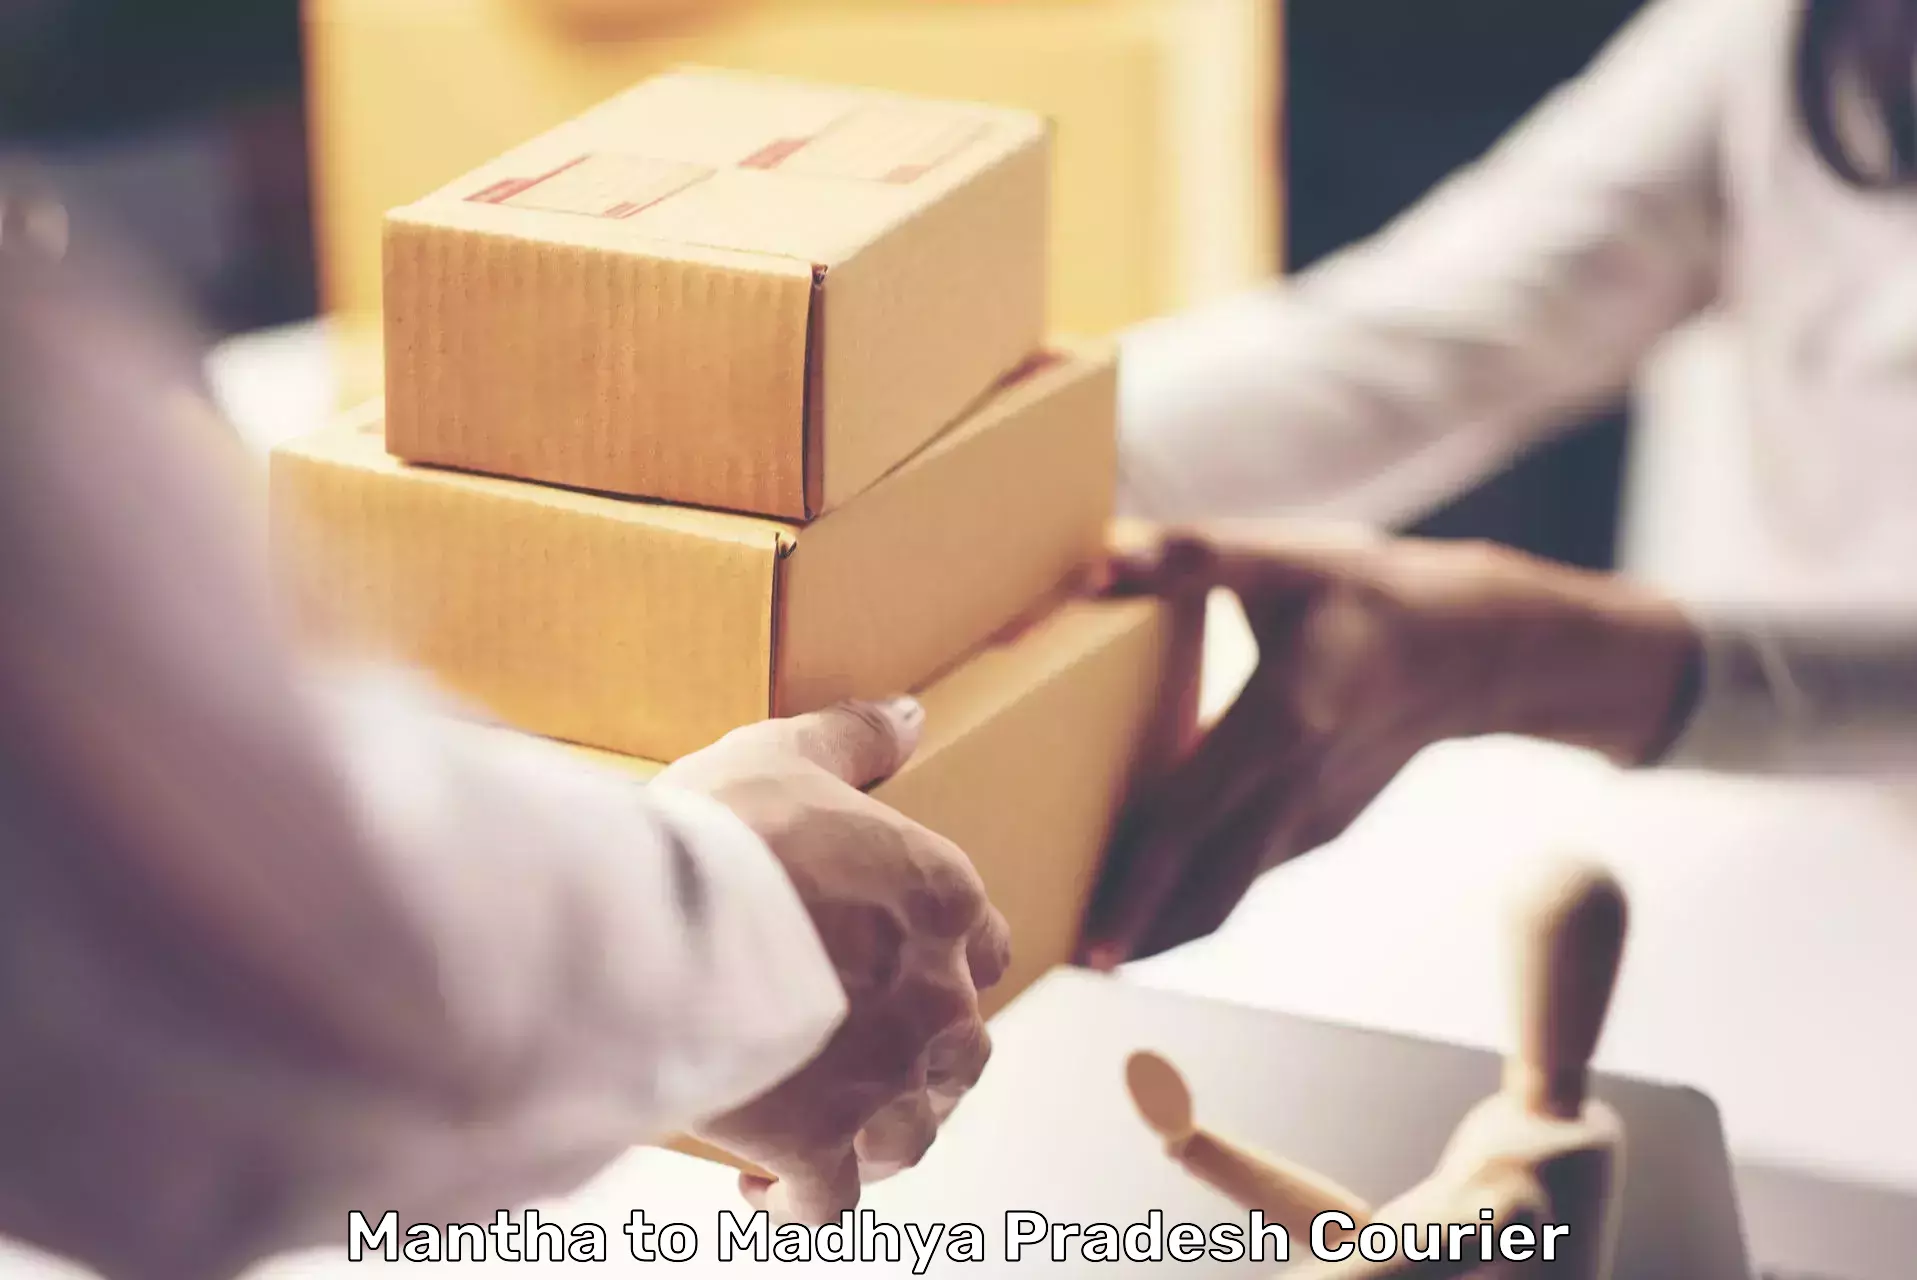 Custom courier packaging Mantha to Ujjain